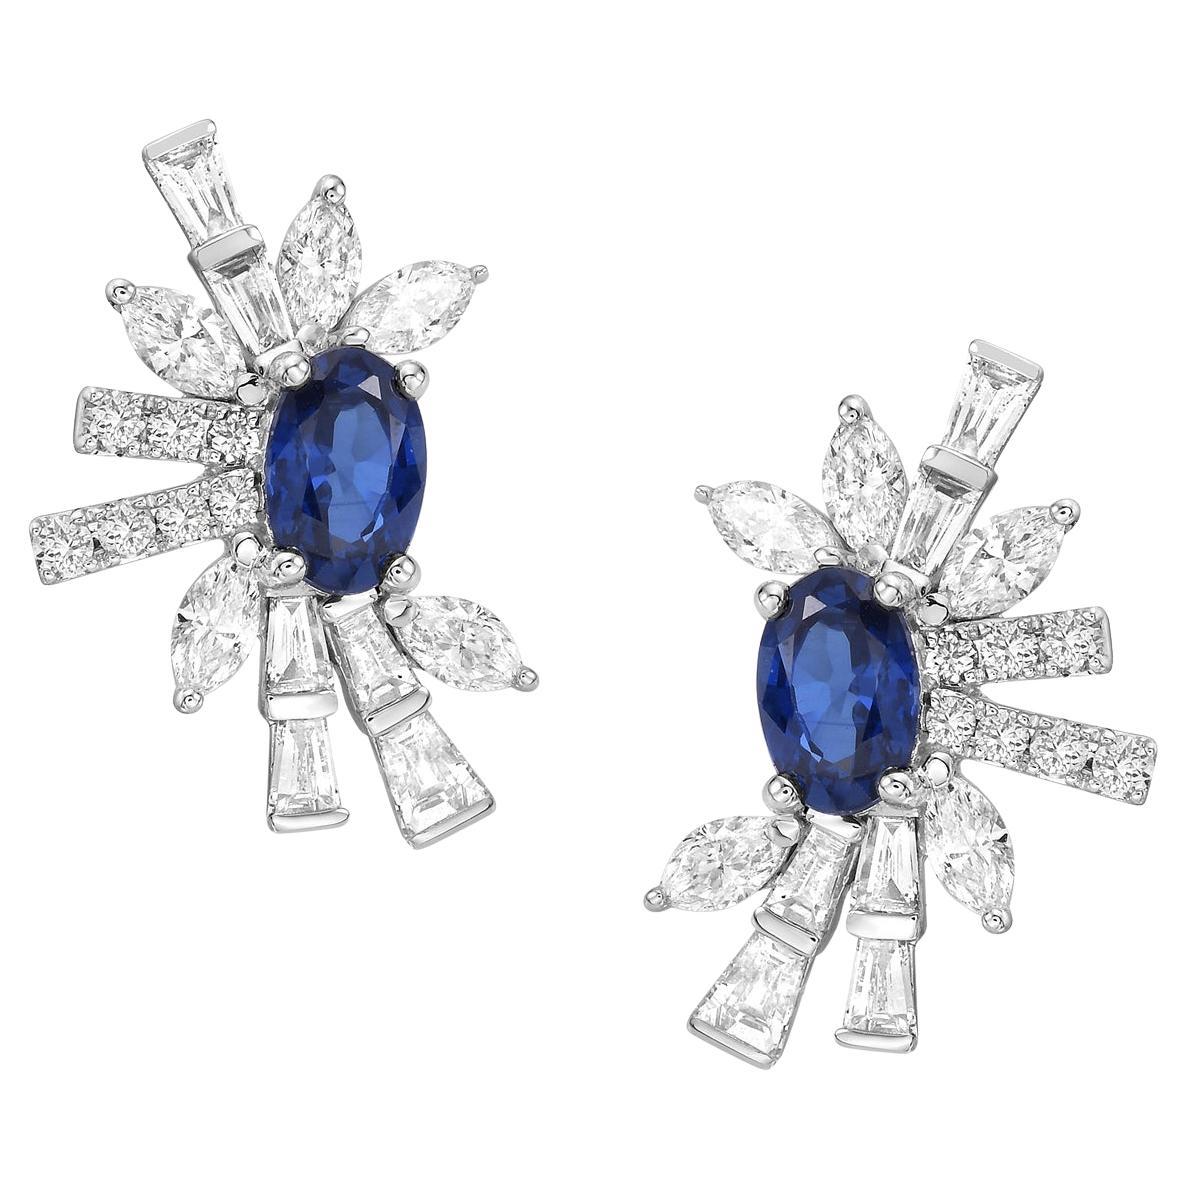 Baguette & Pear Shaped 18k Stud Earrings With Blue Sapphire In Centre For Sale